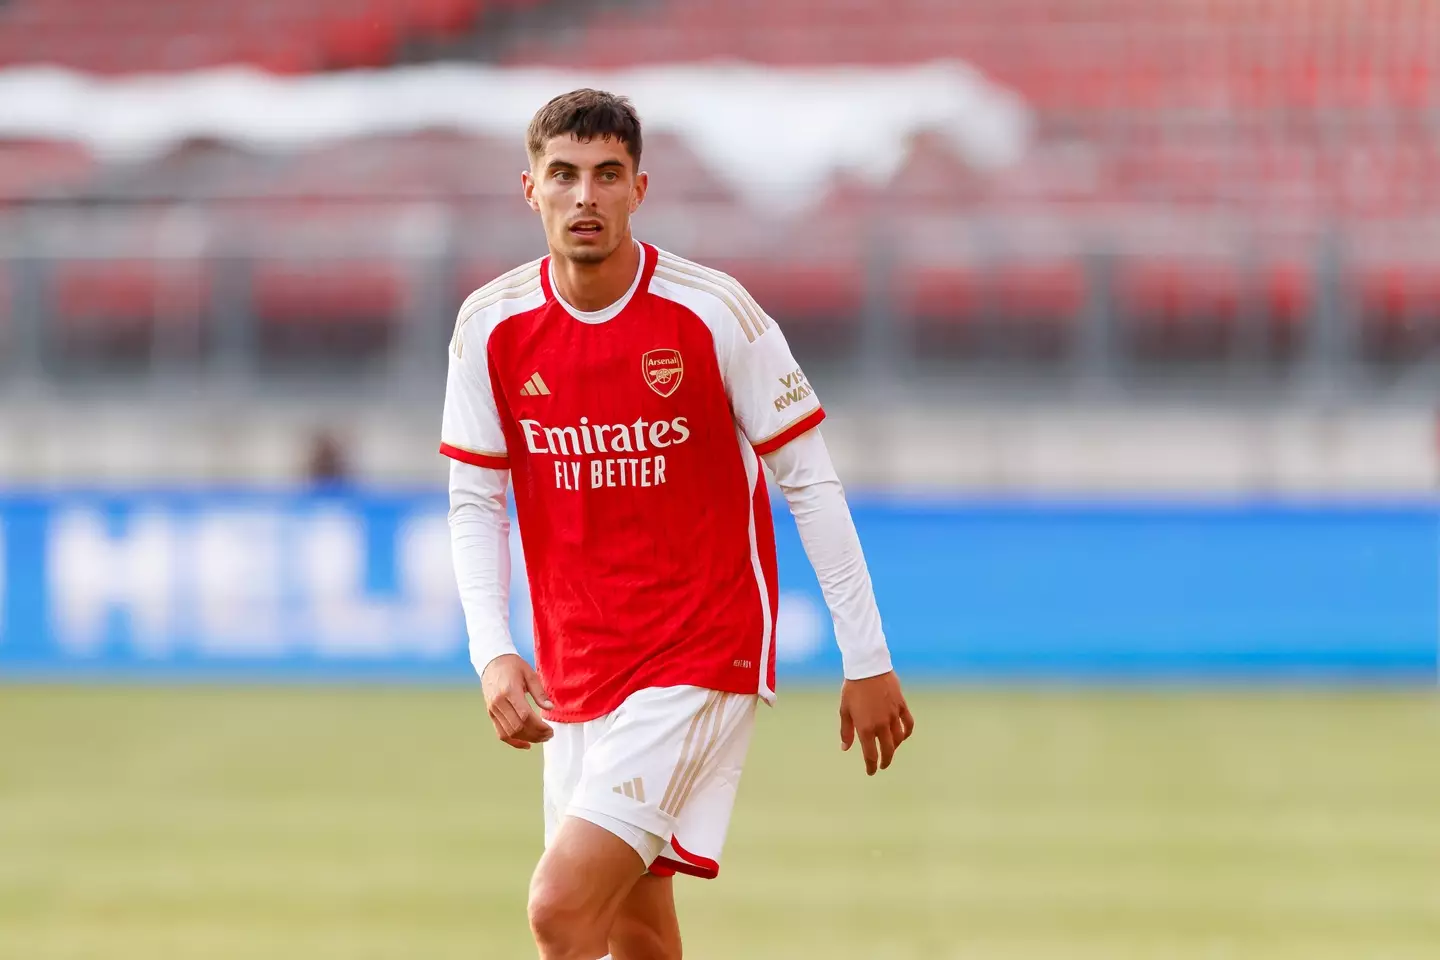 Kai Havertz in action for Arsenal. Image: Getty